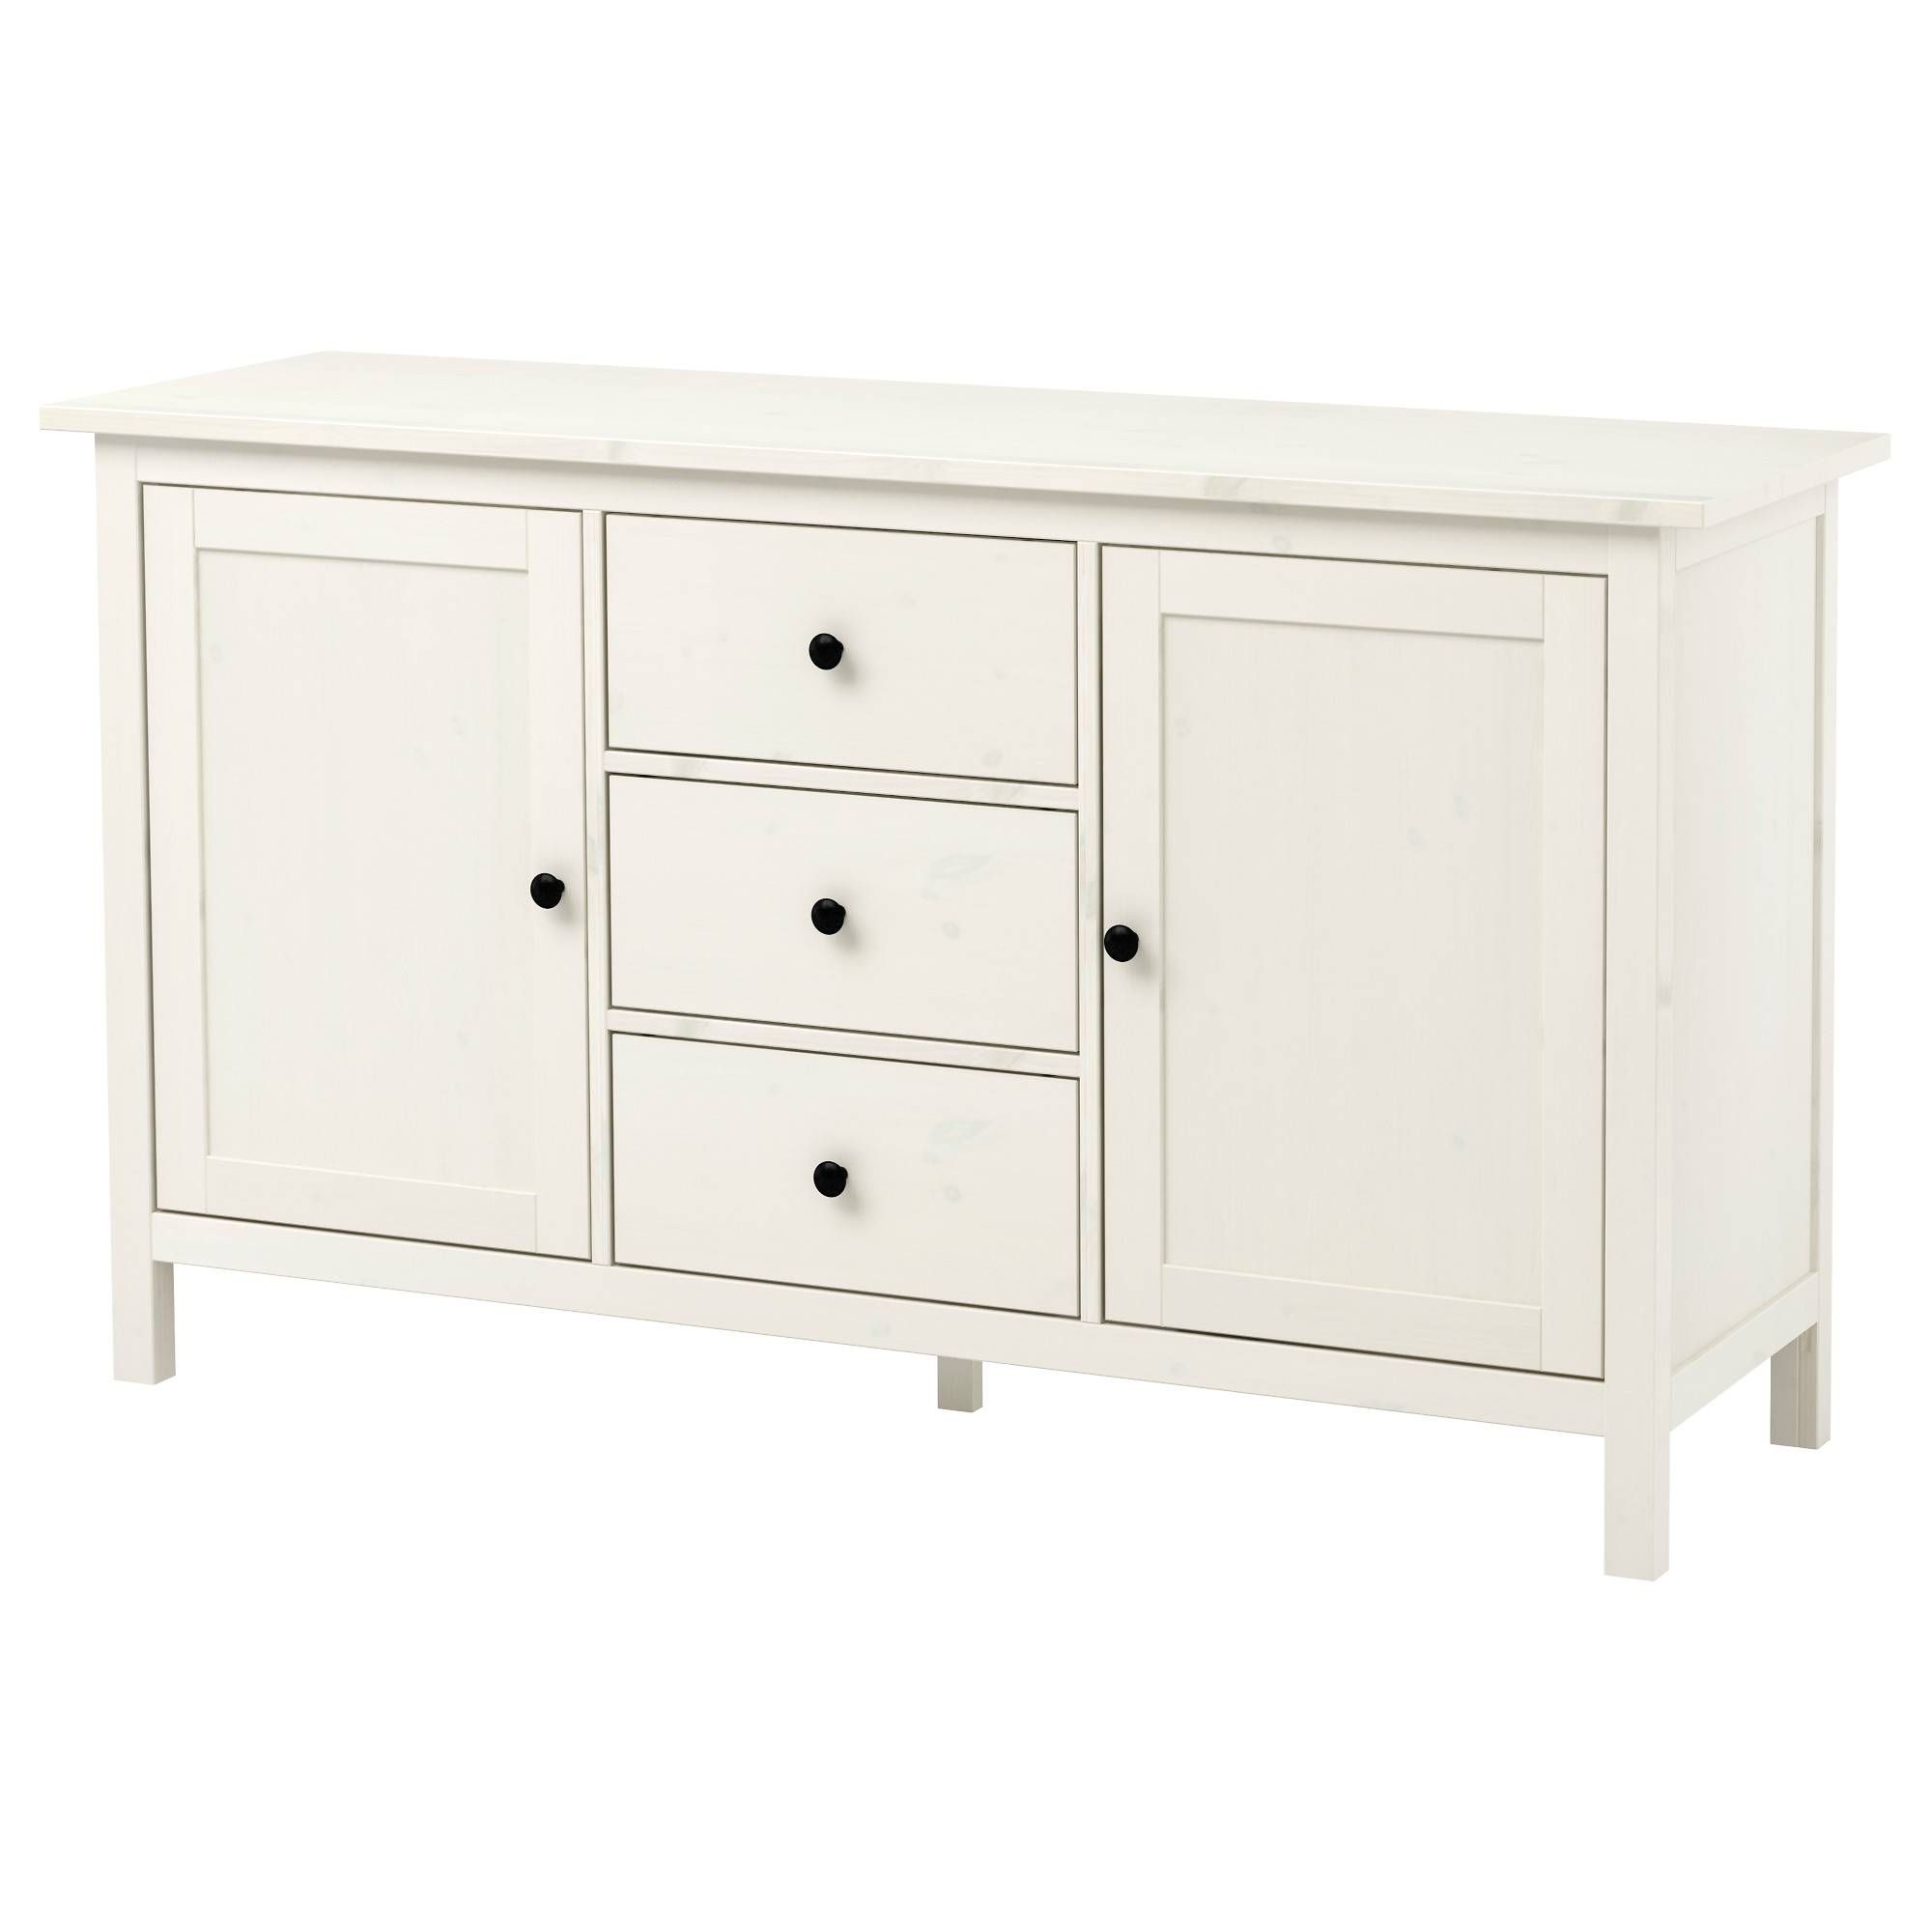 Hemnes Sideboard – White Stain – Ikea Inside 2018 Shallow Sideboards (View 6 of 15)